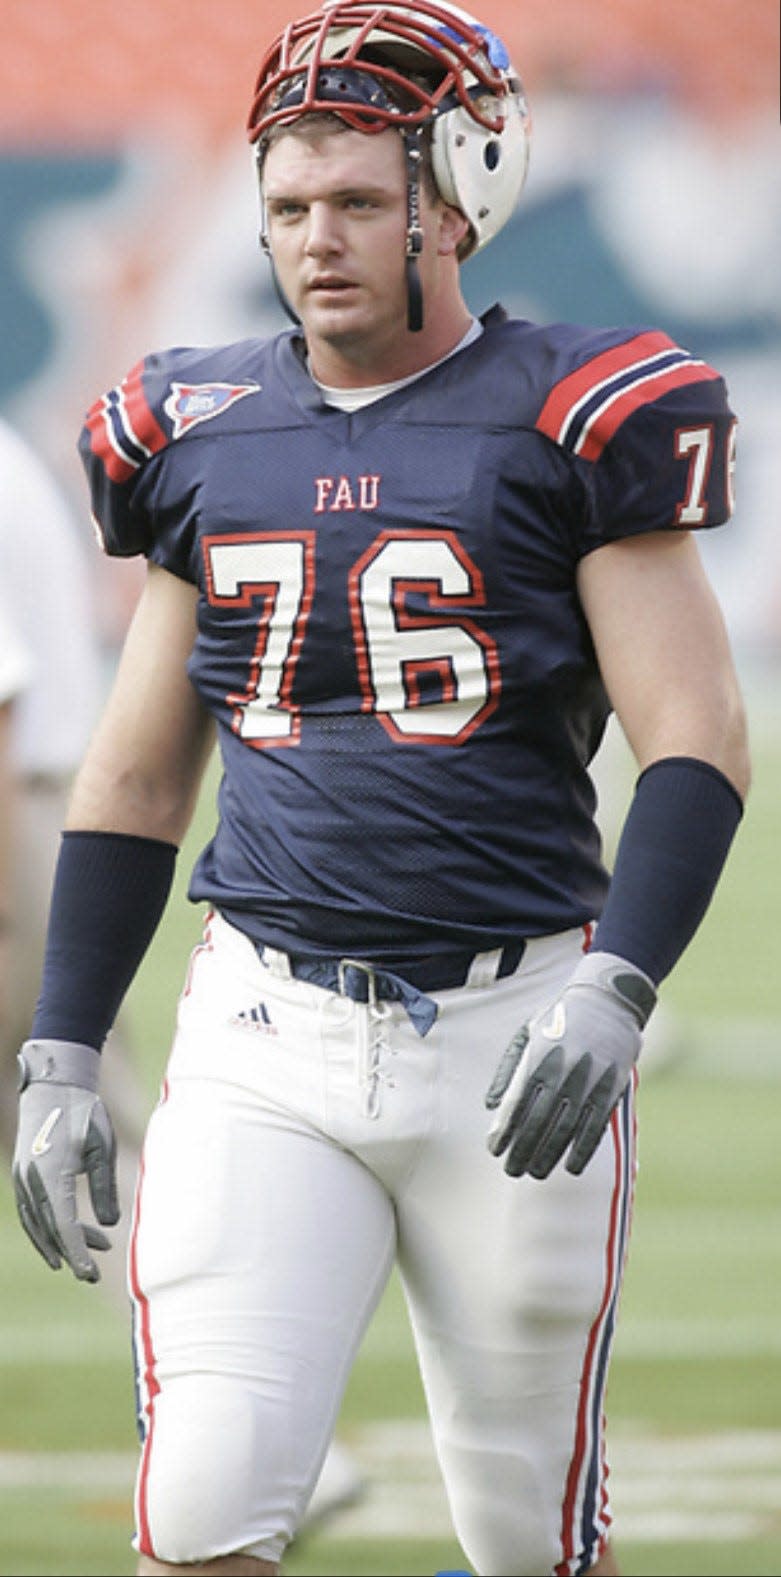 Kevin Fischer, offensive line coach for Boca High's football team, was a starting offensive tackle on the 2003 FAU Owls